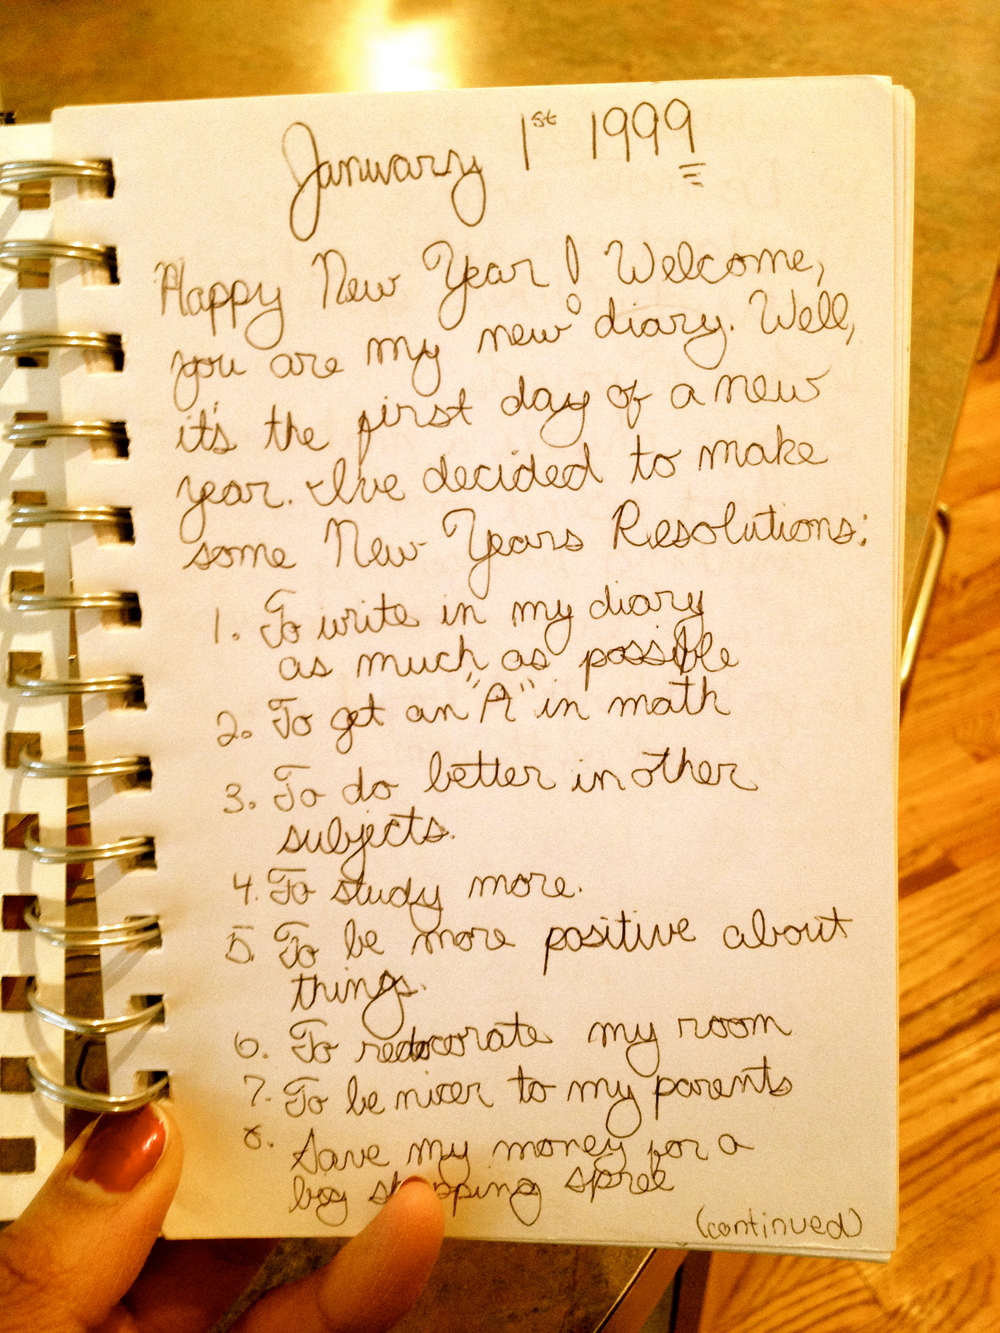 My first New Year's Resolution diary entry. Wow, was I a goody goody or what?! And haven't really changed much.